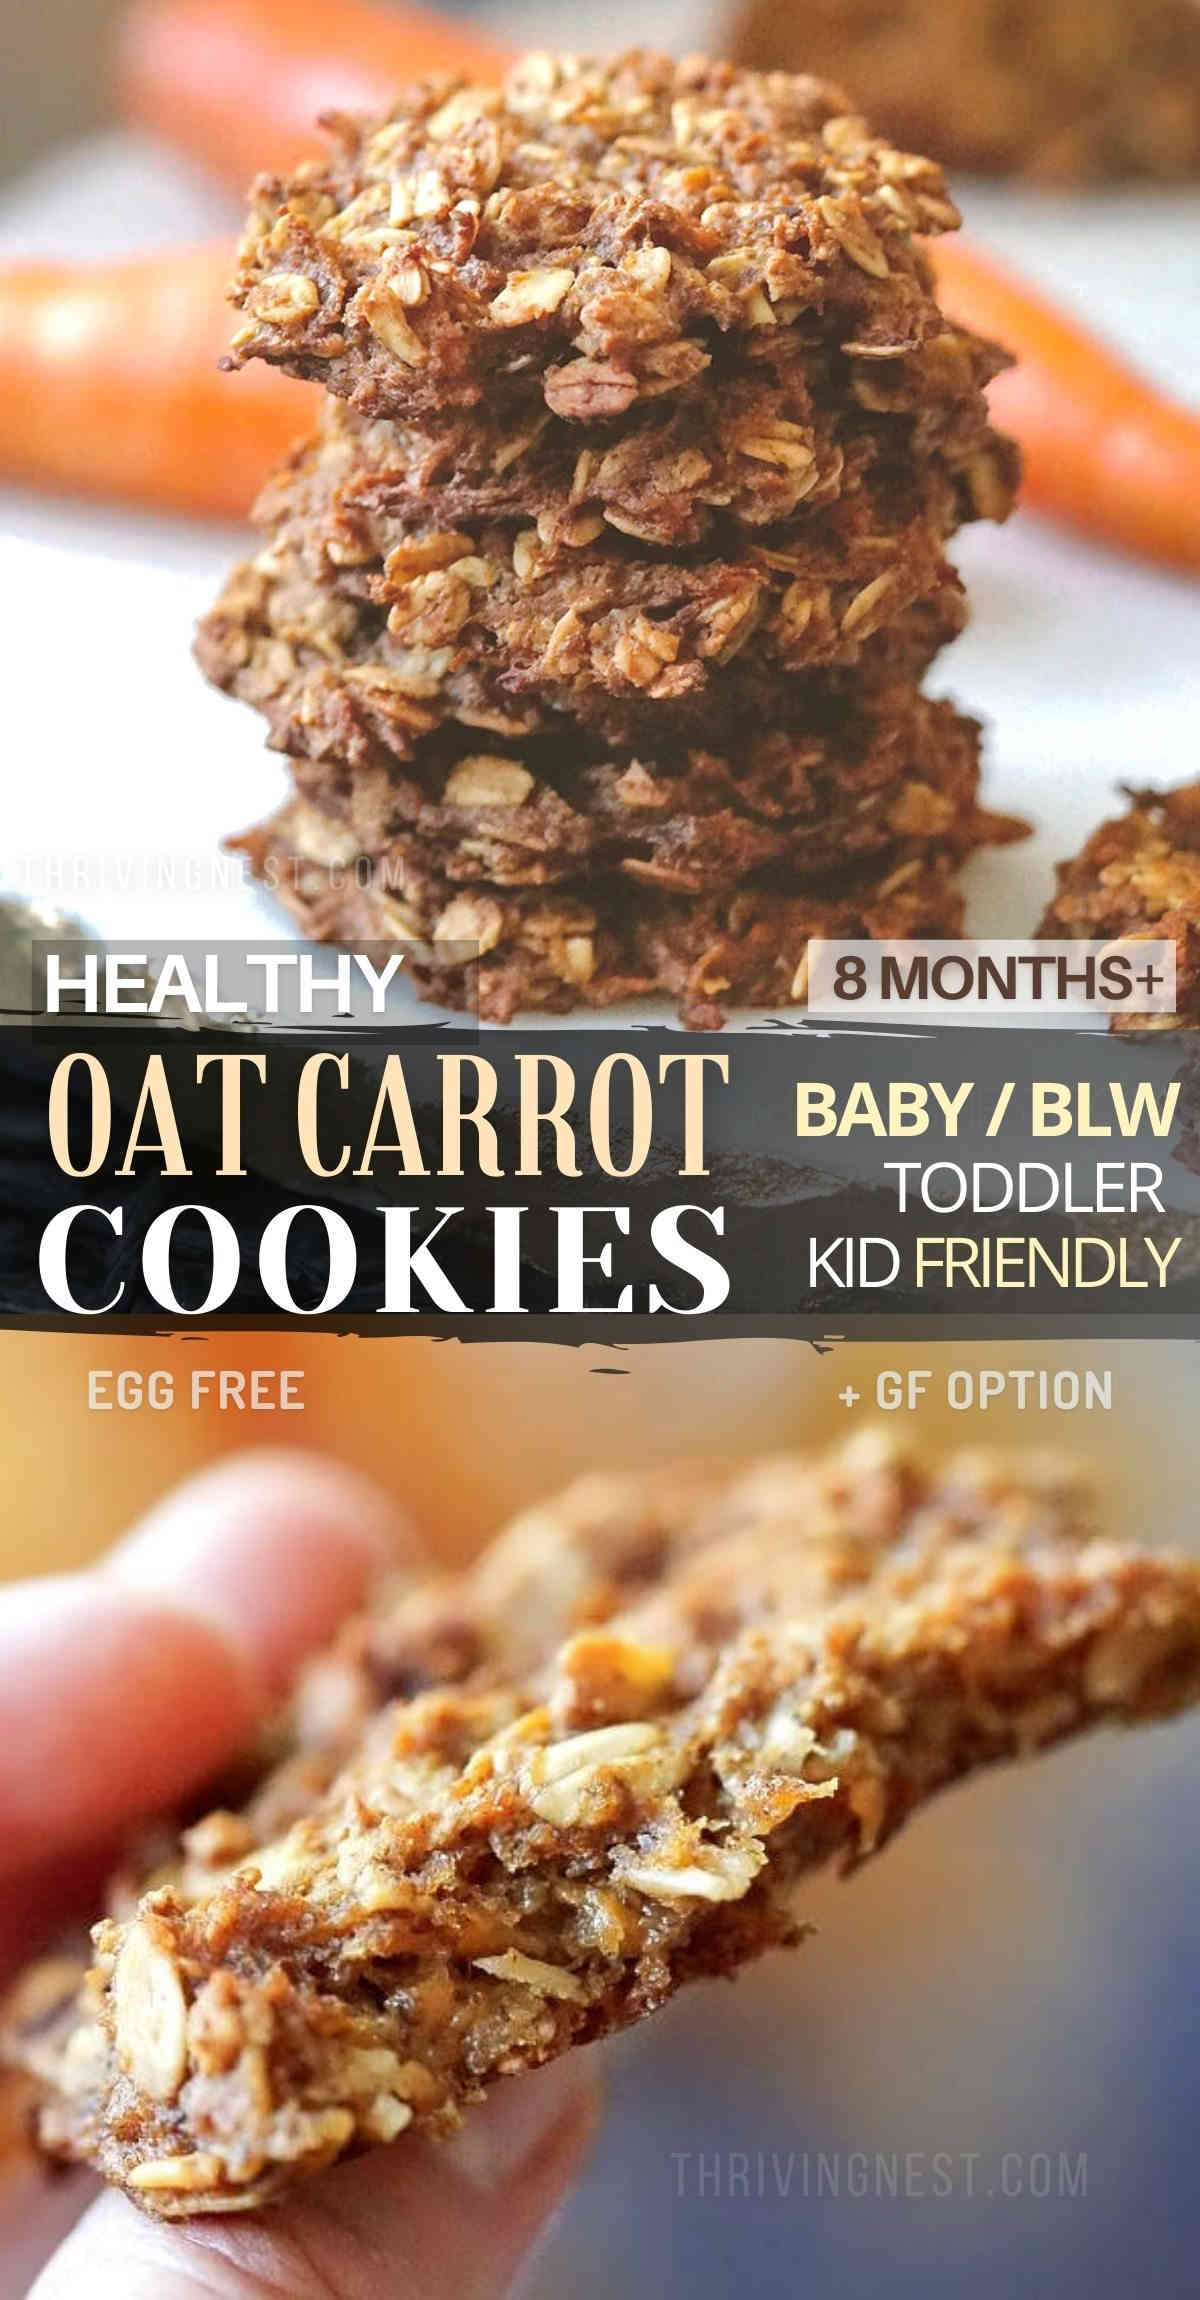 Healthy oat carrot cookies for baby (8 months+) toddler, baby led weaning and kid friendly. This baby cookie recipe is easy, healthy, egg free, dairy free and can be also gluten free. The baby oat cookies are naturally sweetened with grated carrots and applesauce and yields a soft chewy texture. So if you're looking for healthy oatmeal cookies for baby, these are just great! #oatmealcookies #babycookies #toddlercookies #oatcookies #carrotcookies #applesaucecookies #healthycookies #babyrecipe #blw